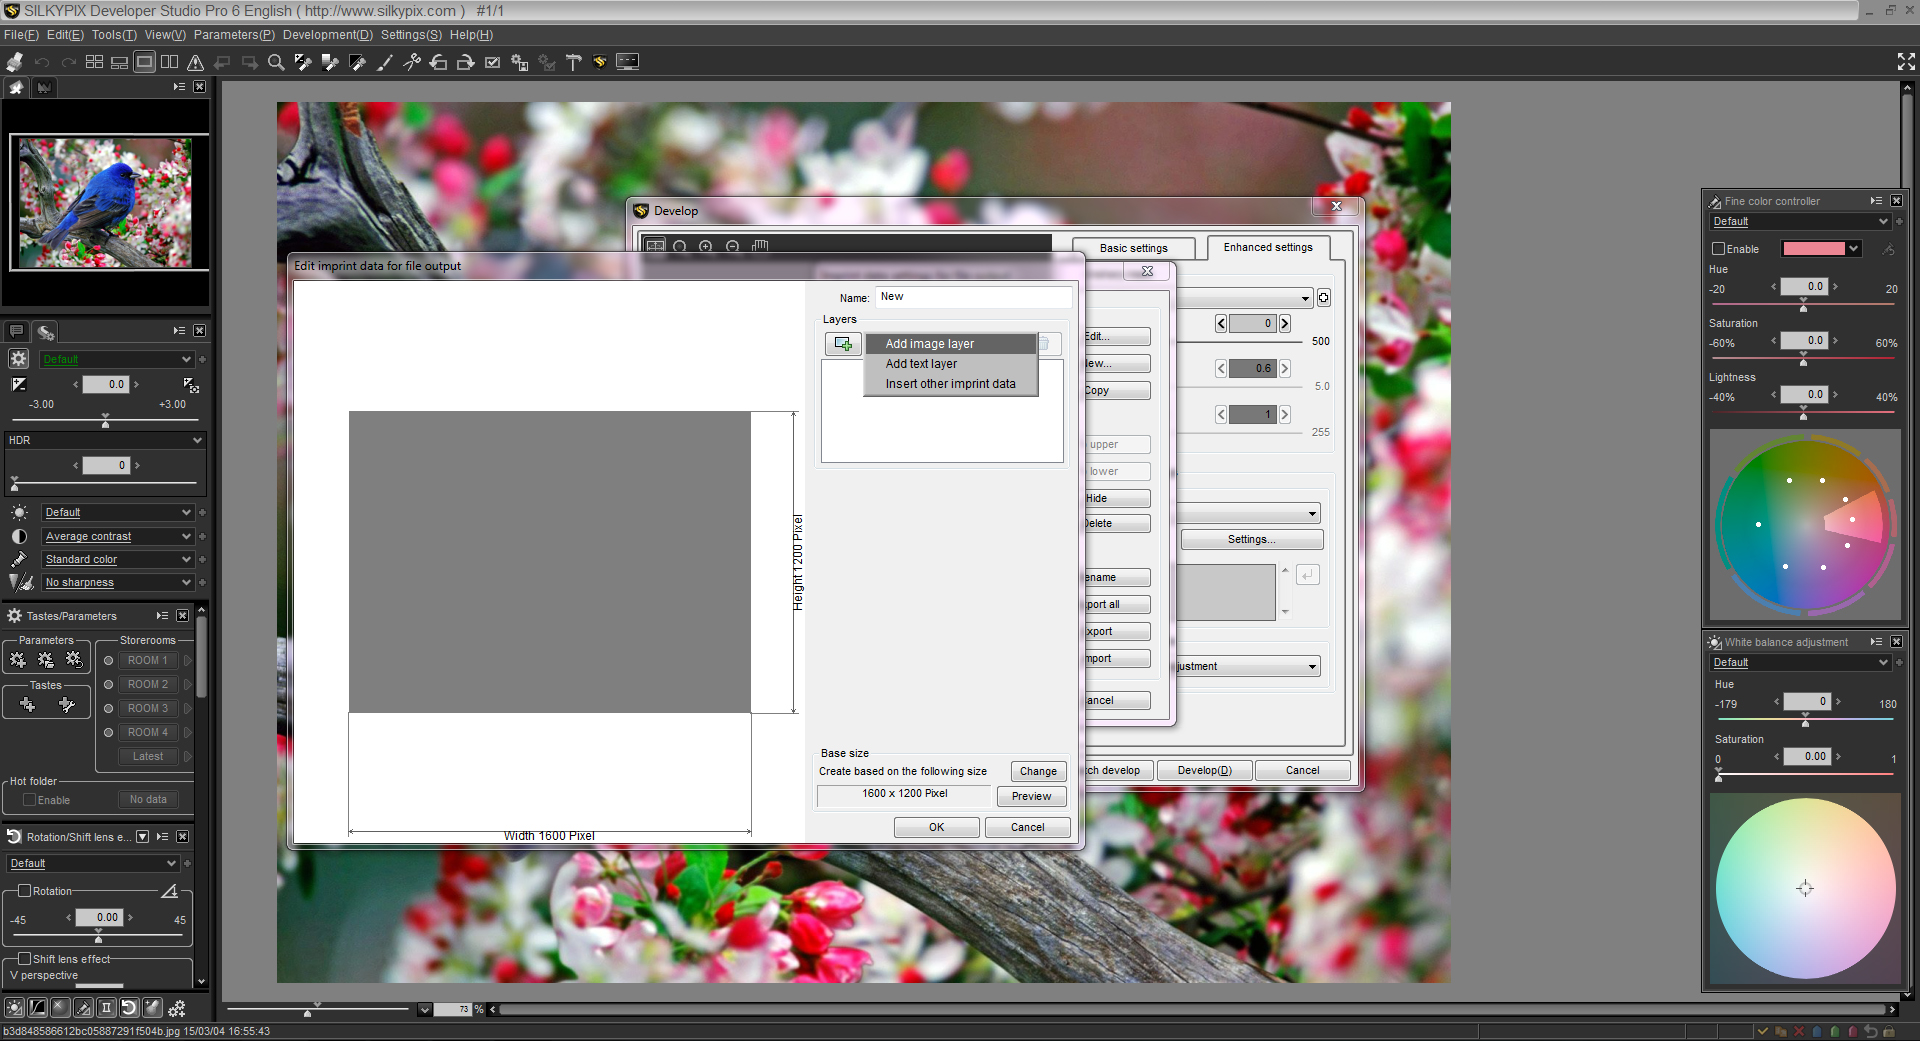 Add a Layer in the SILKYPIX template